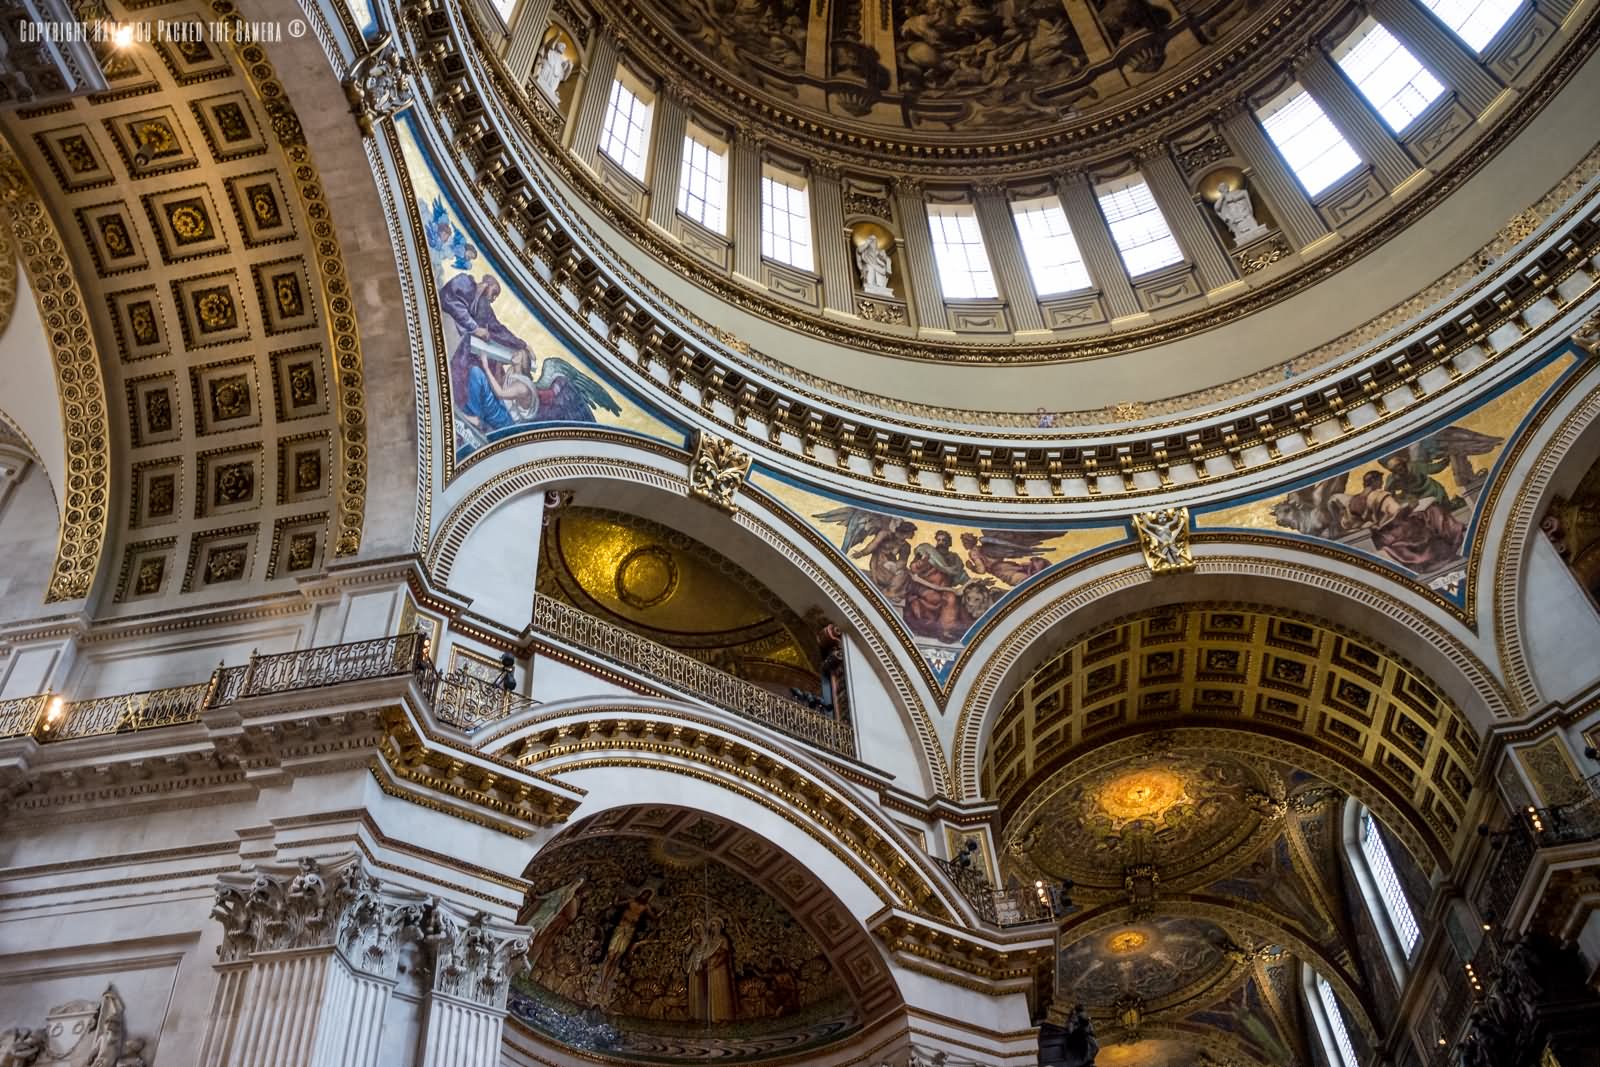 Adorable Architecture Inside St Paul's Cathedral